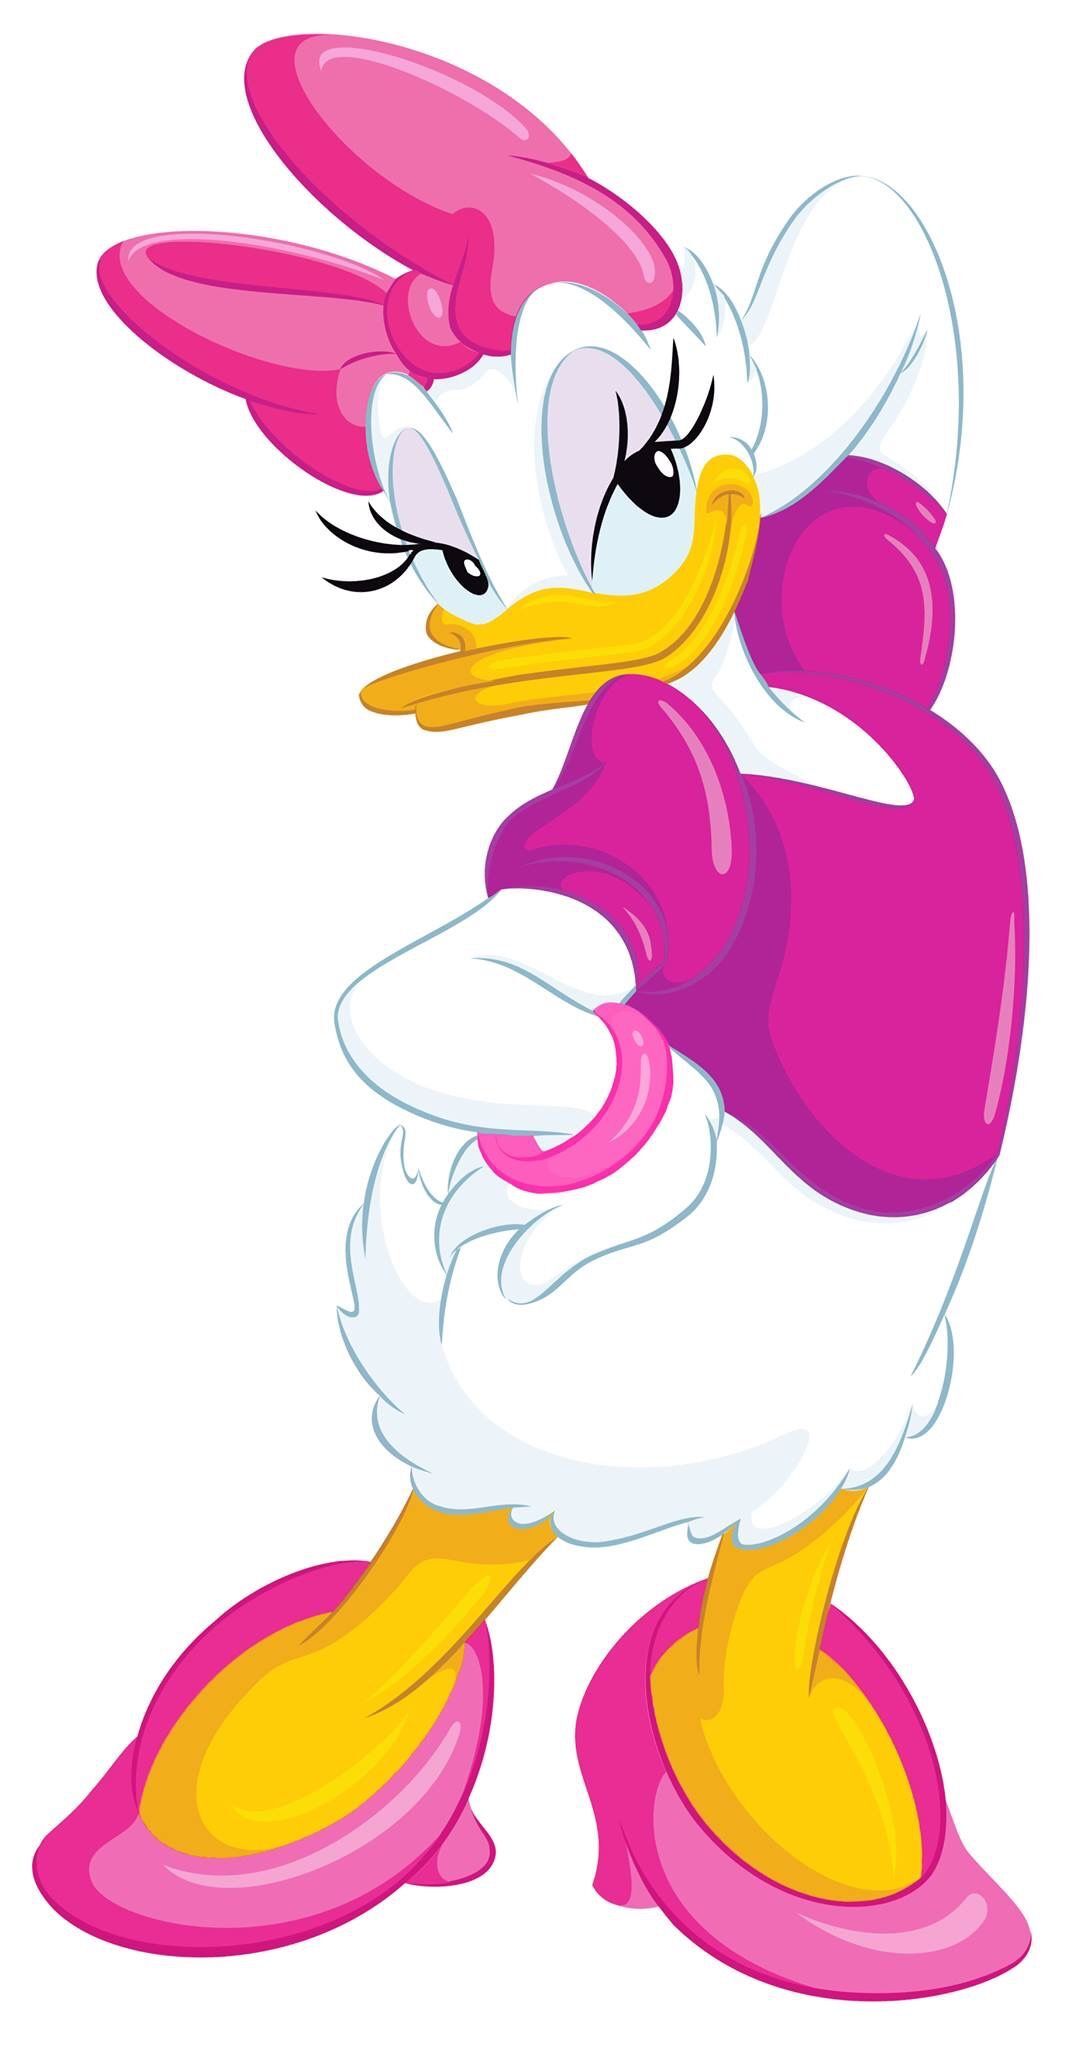 https://static.wikia.nocookie.net/legendsofthemultiuniverse/images/2/20/Daisy_Duck.jpg/revision/latest/scale-to-width-down/1084?cb=20180806190309